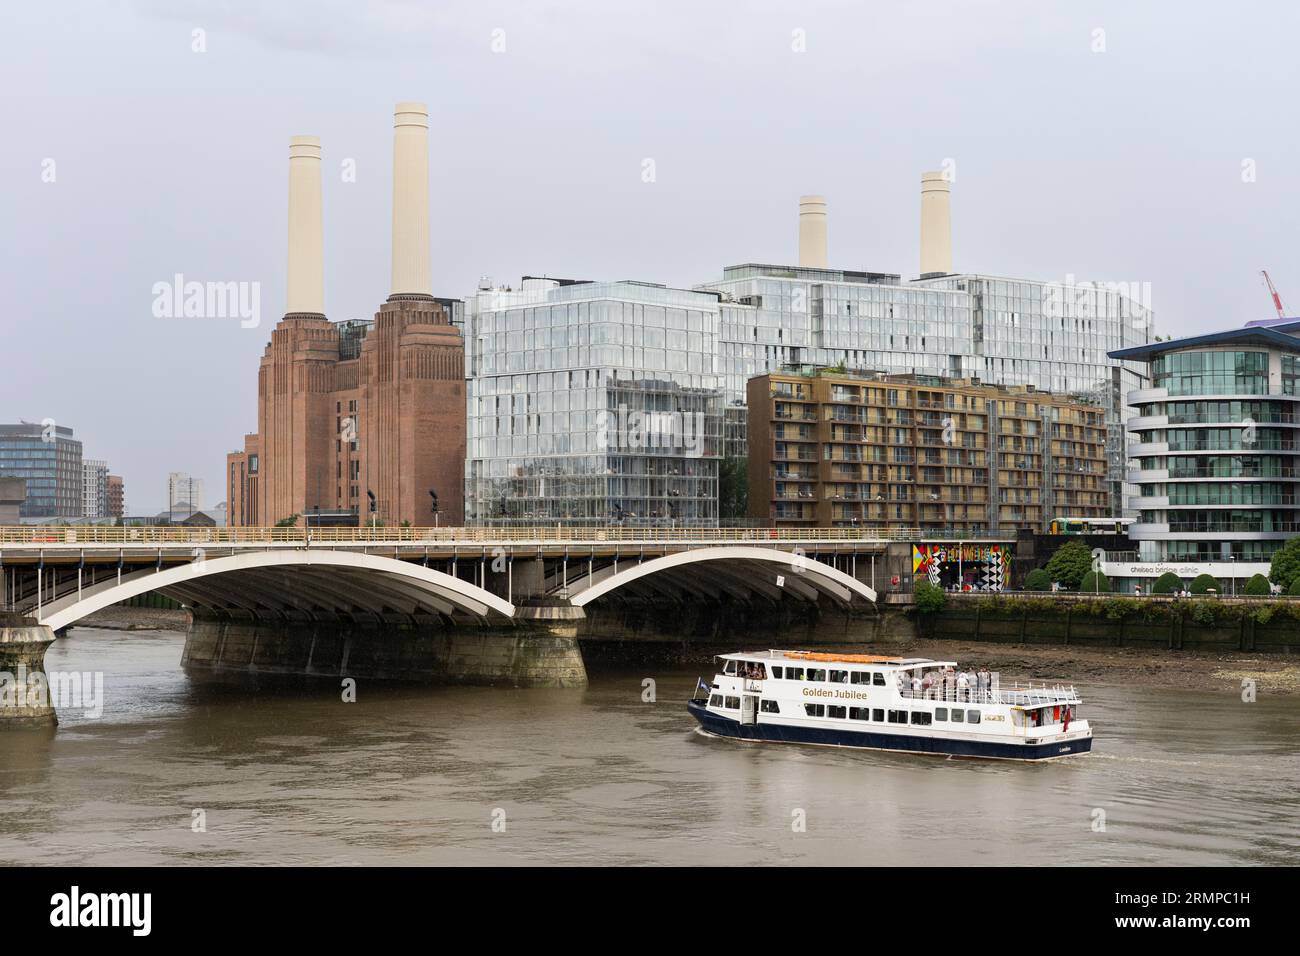 The Golden Jubilee party boat passing under the Grosvenor Railway Bridge with the iconic Battersea Power Station redevelopment behind. London, UK Stock Photo